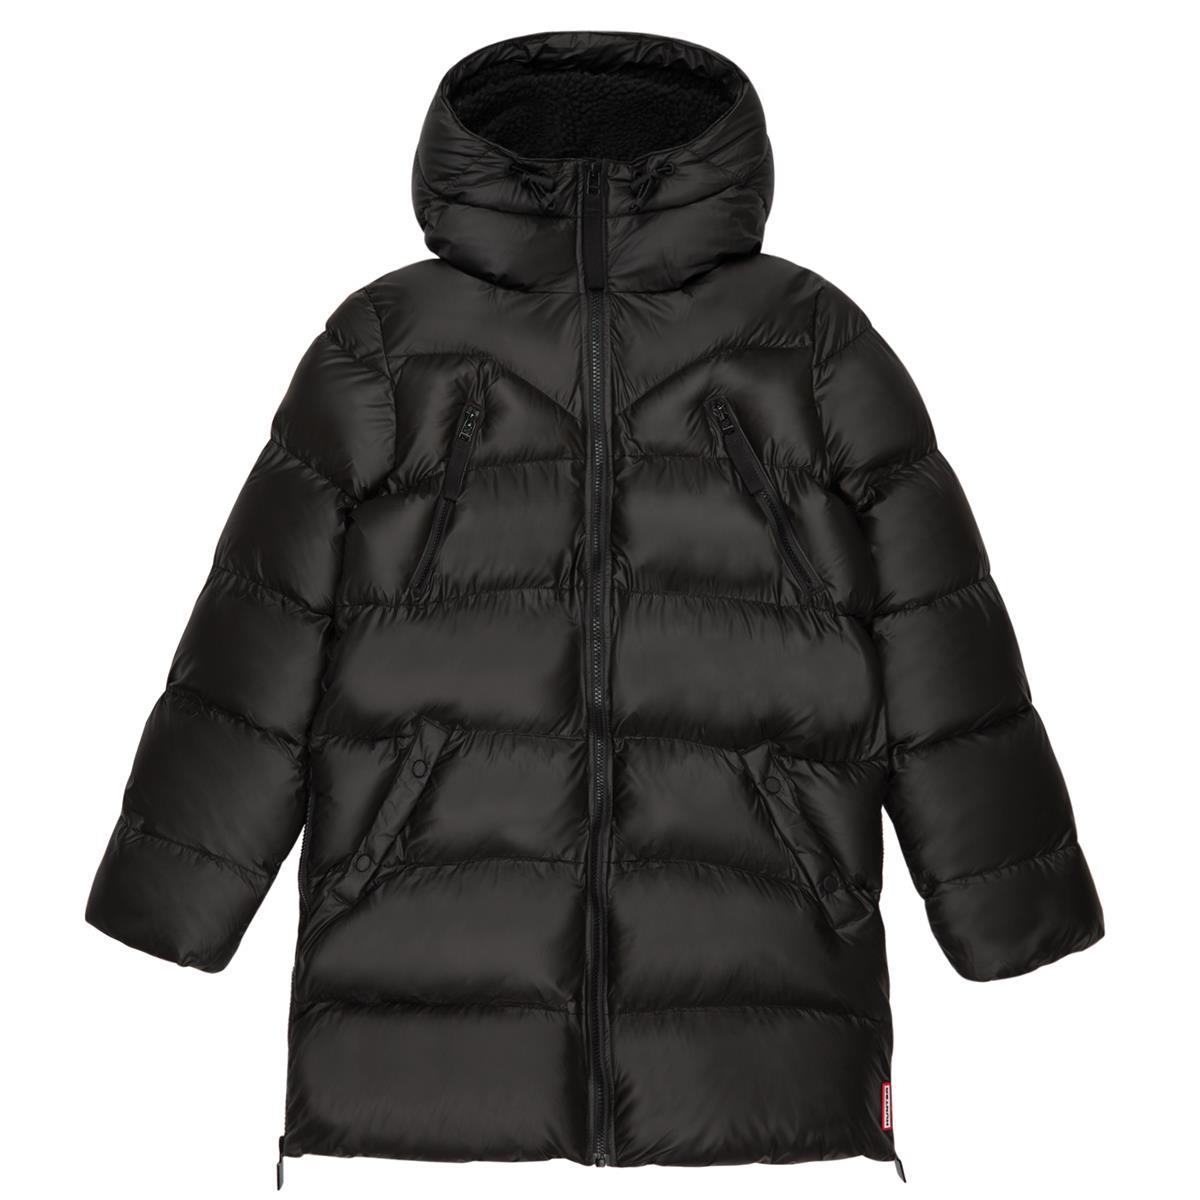 What is the PM Ref for the Hunter Women's Original Puffer Jacket?